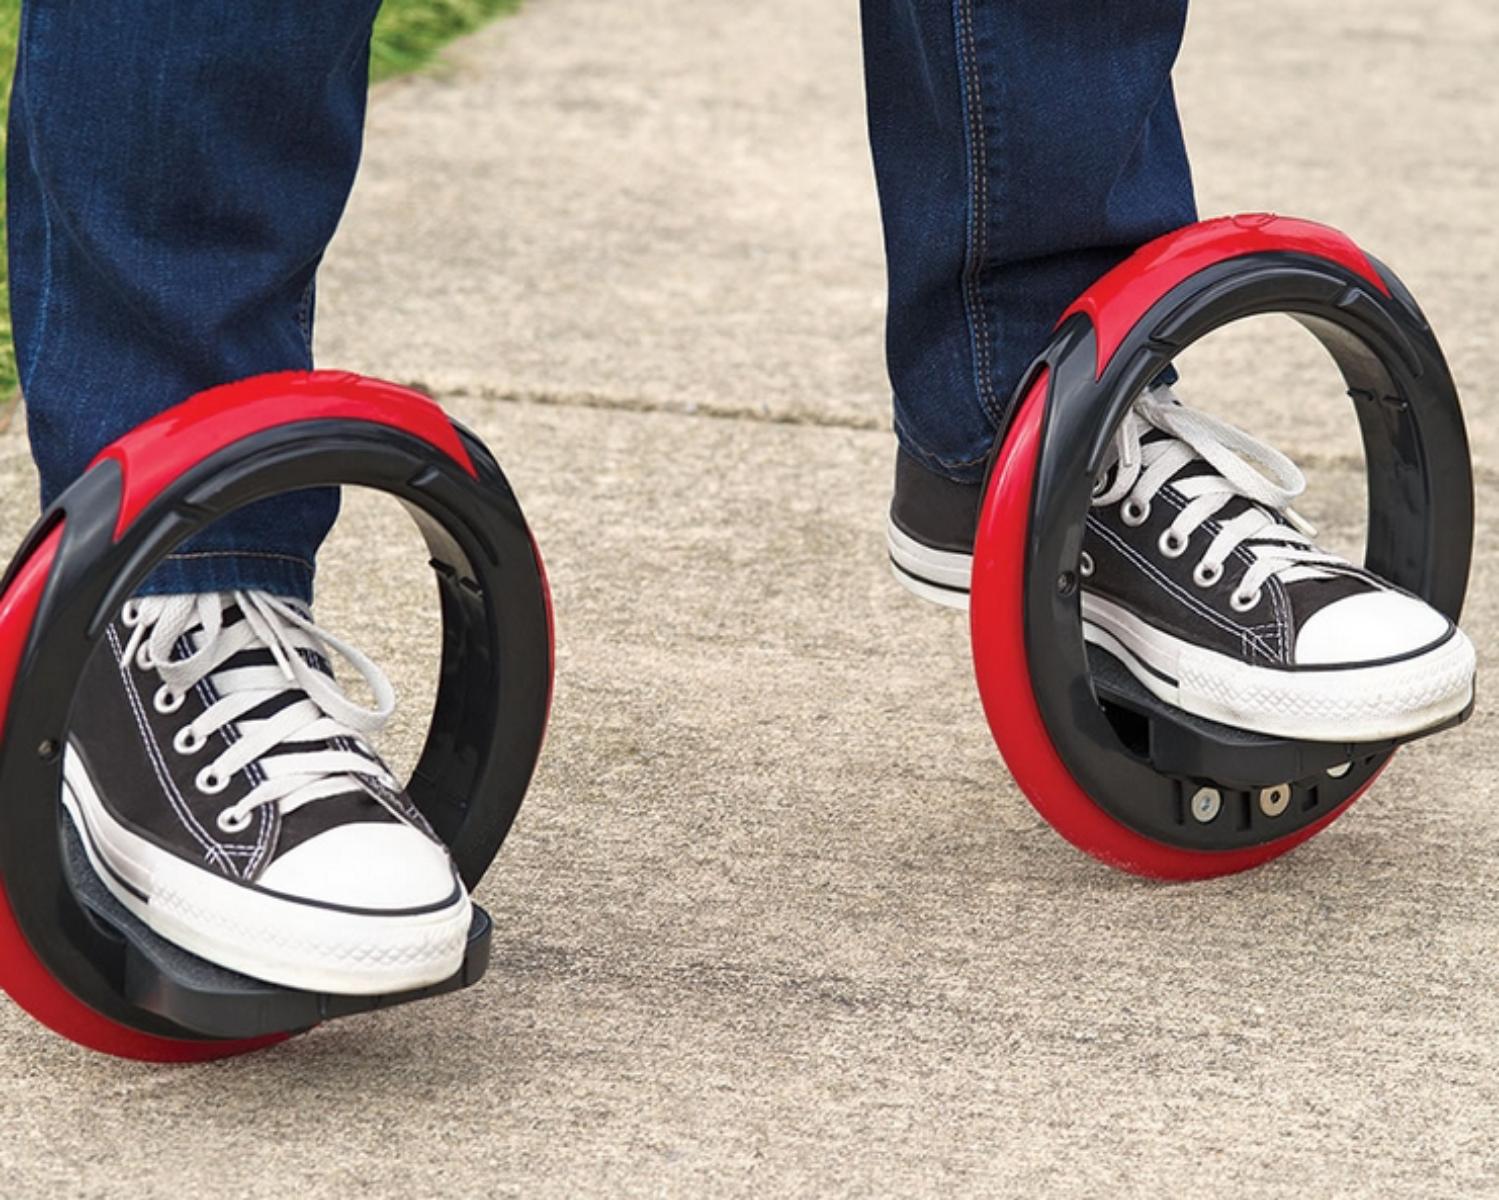 The Fantastic And Futuristic Skaterollers: 2-in-1 For Fun